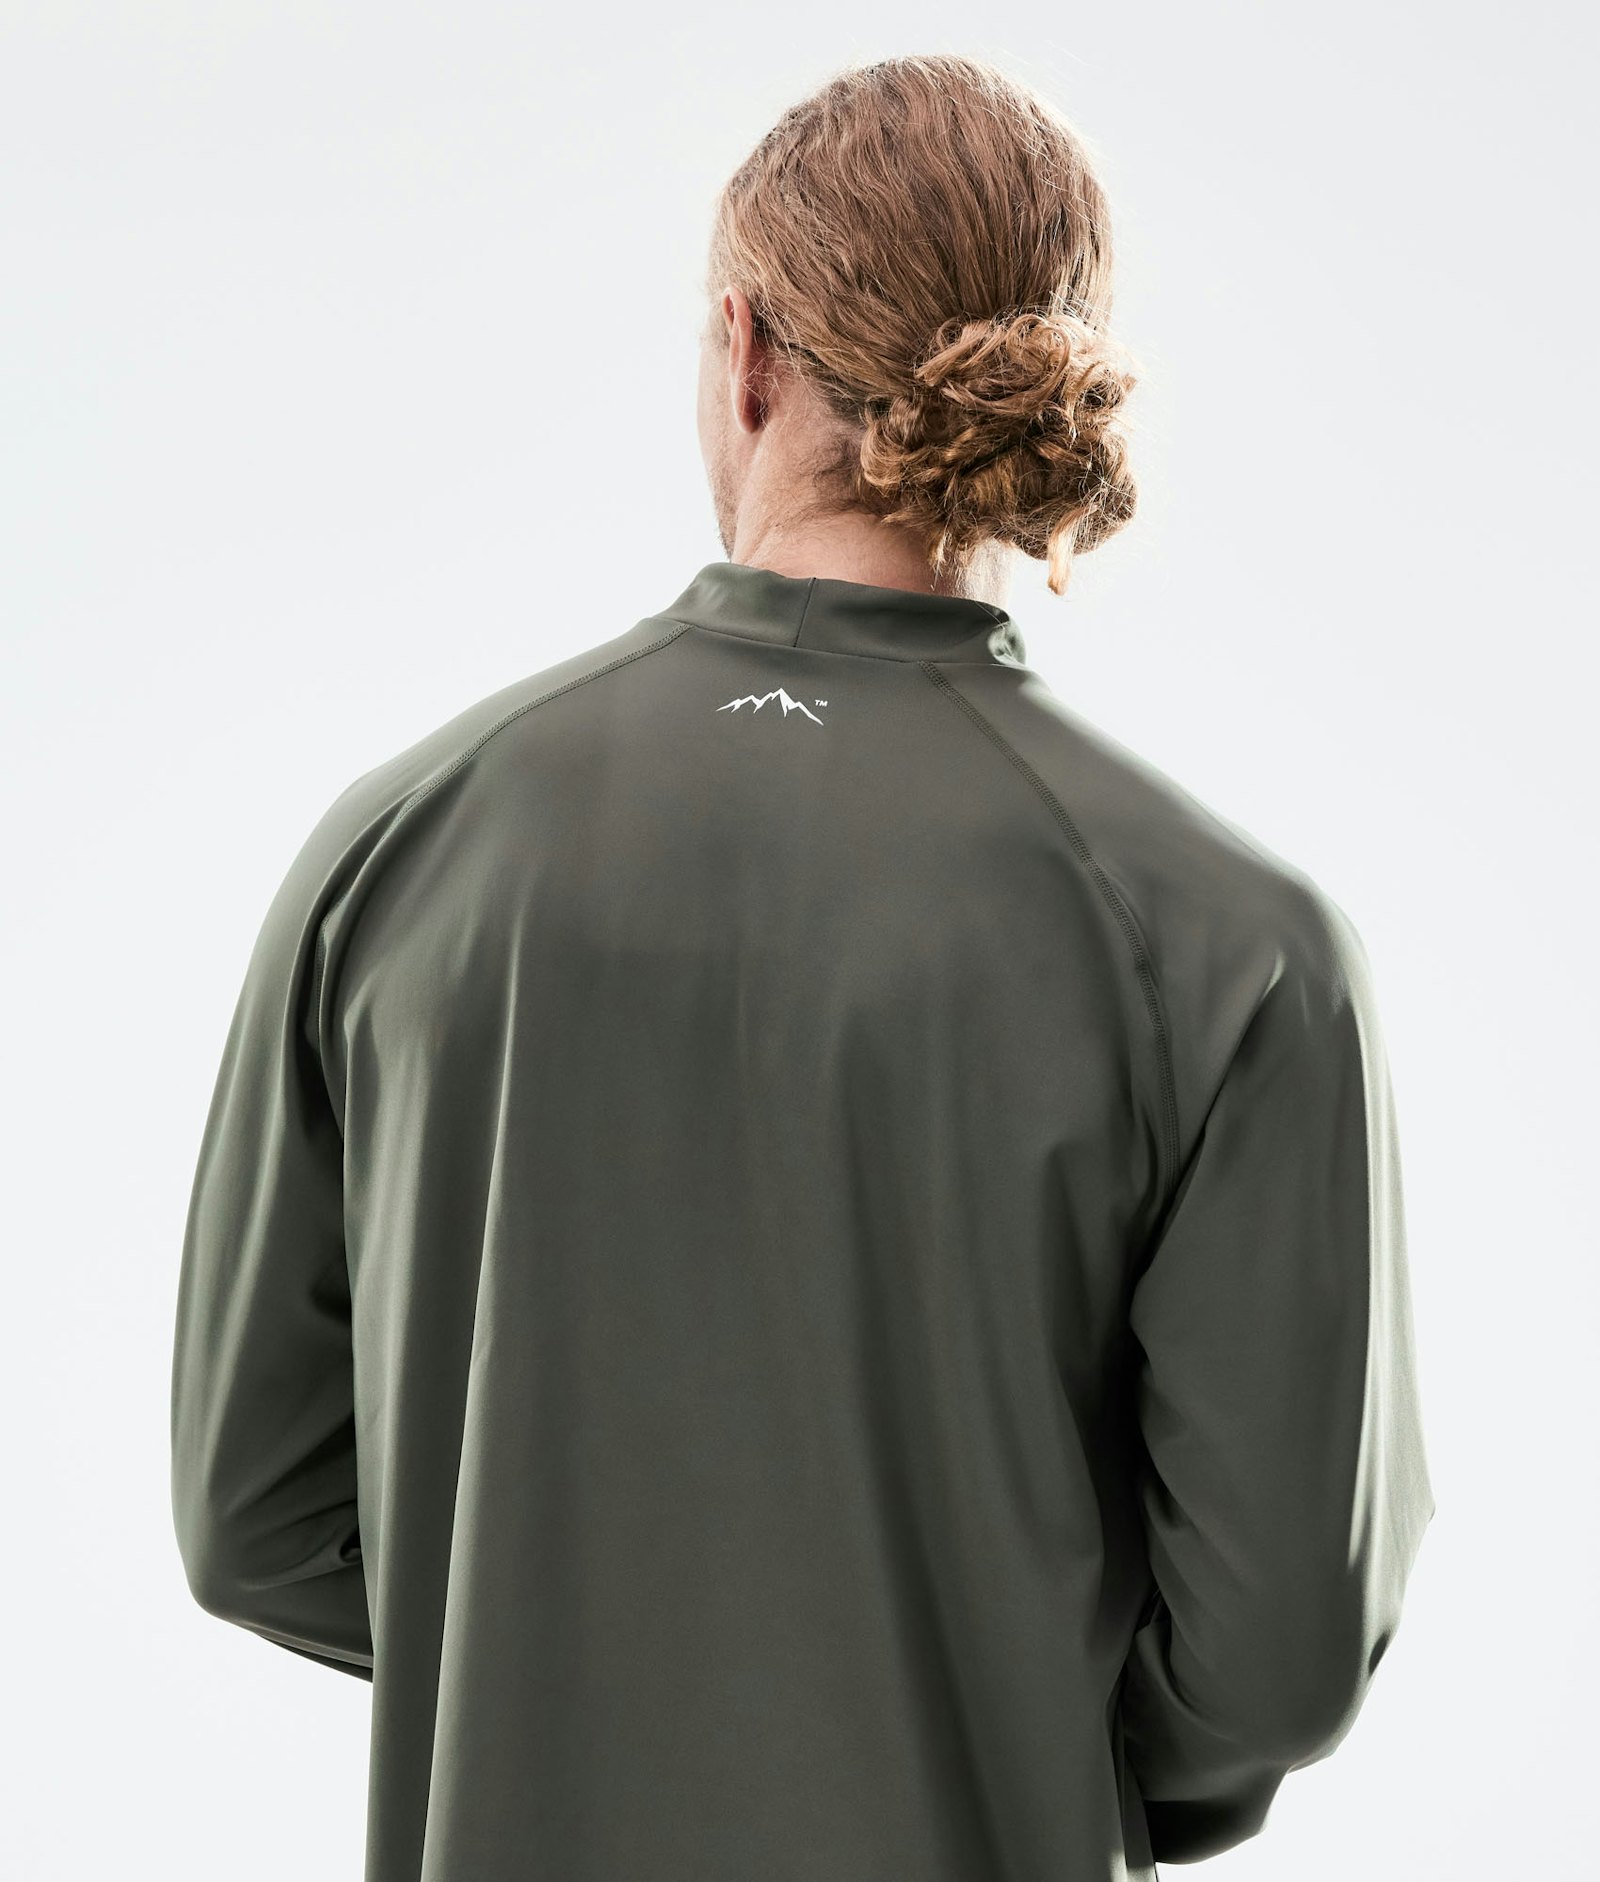 Snuggle Base Layer Top Men 2X-Up Olive Green